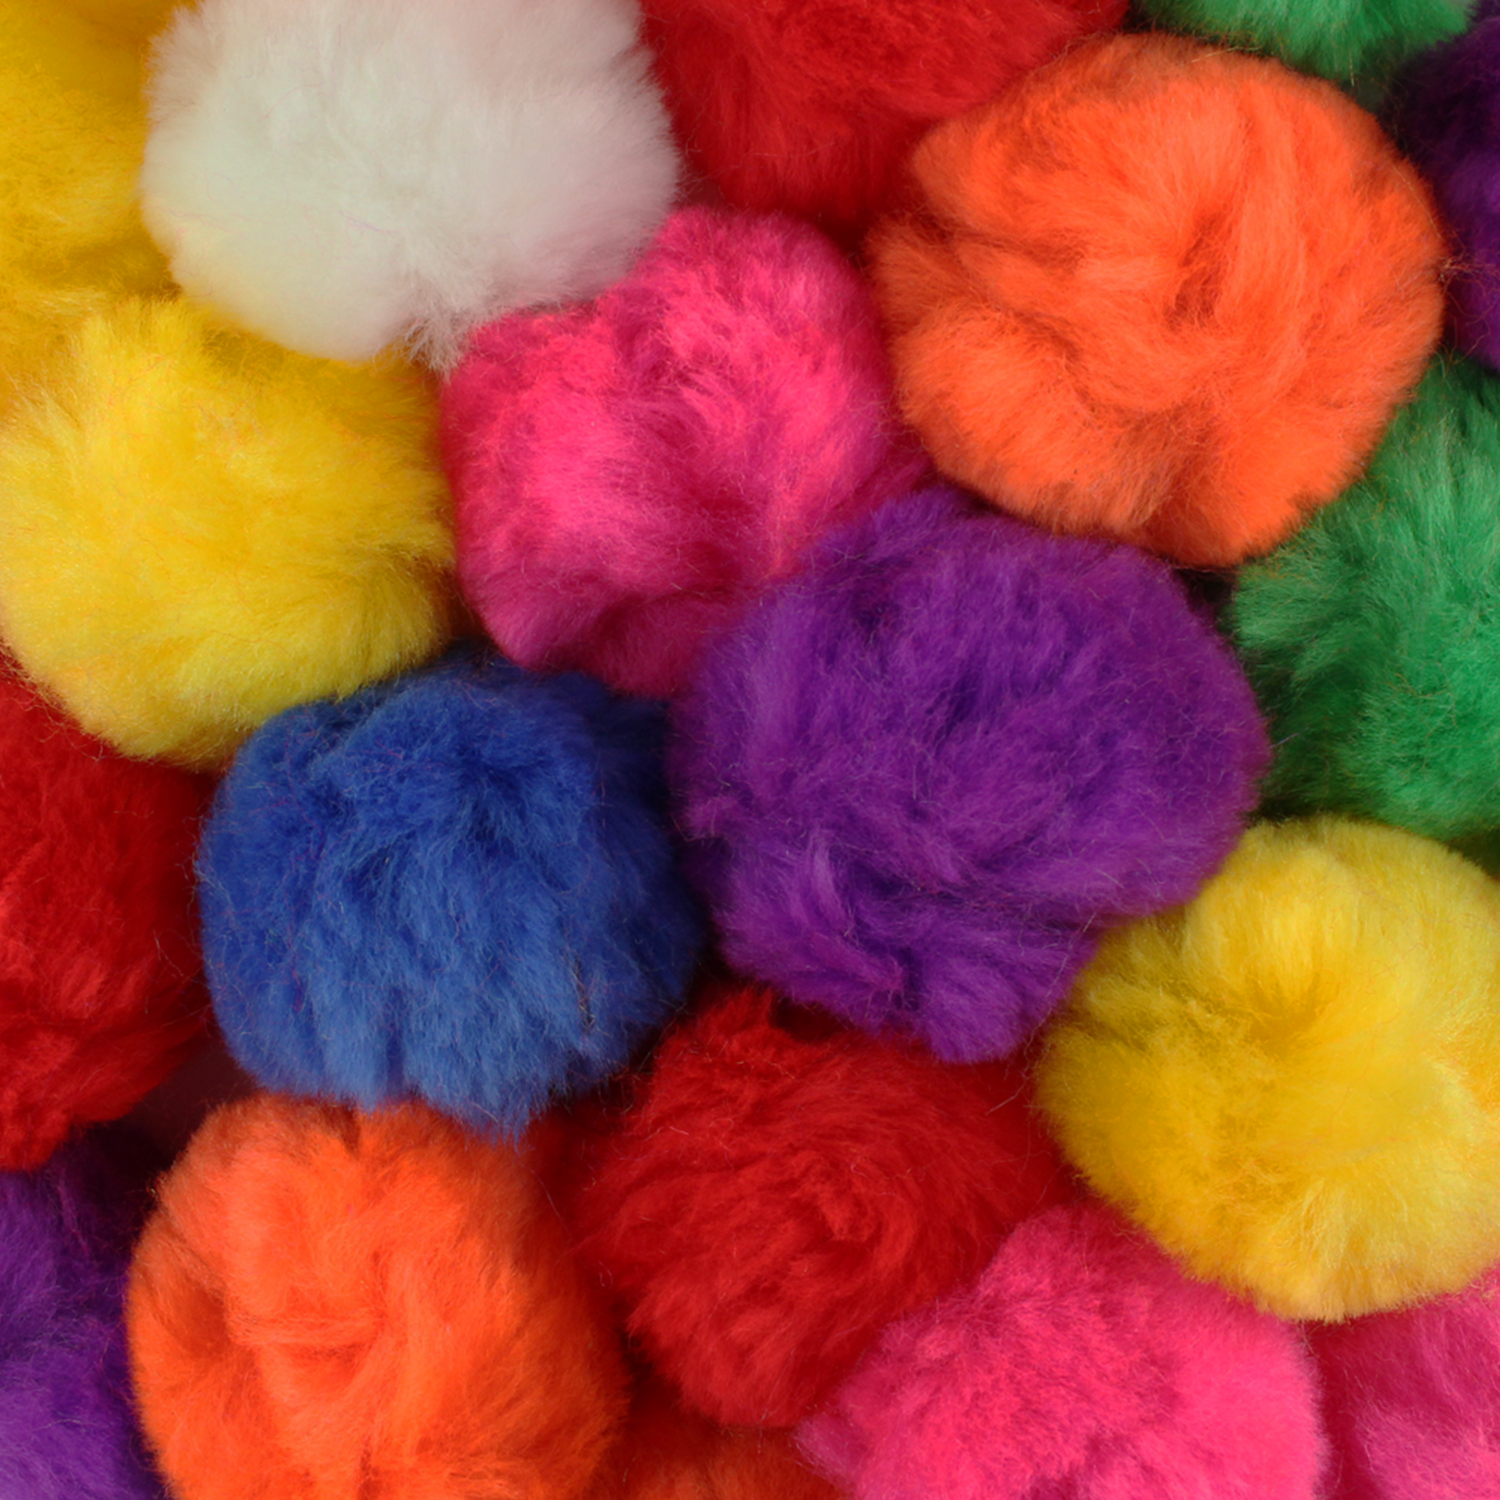 100 Pieces Colorful Yarn Pom Poms Jewelry Making / Decoration Party 